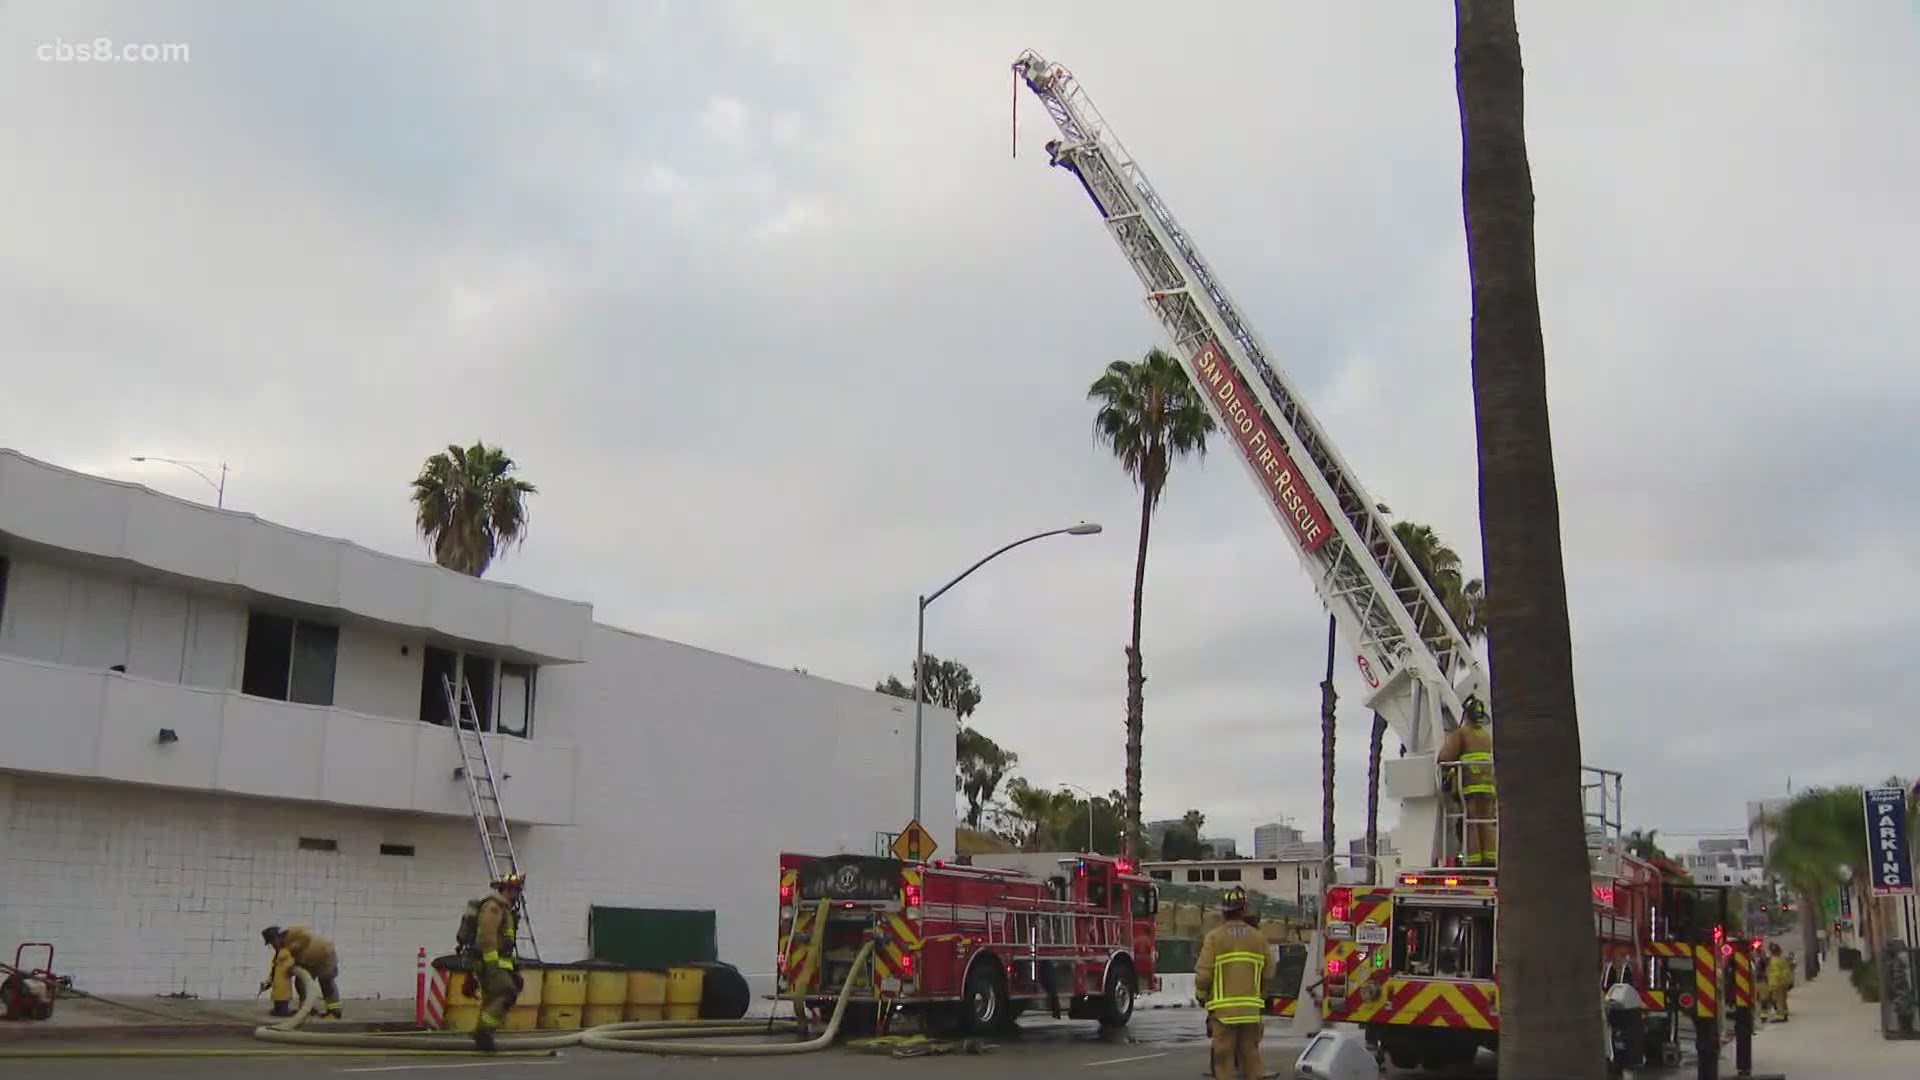 The fire started around 6 a.m. on the first floor of a commercial building in the 2000 block of Kettner Boulevard, just off the Interstate 5 freeway.